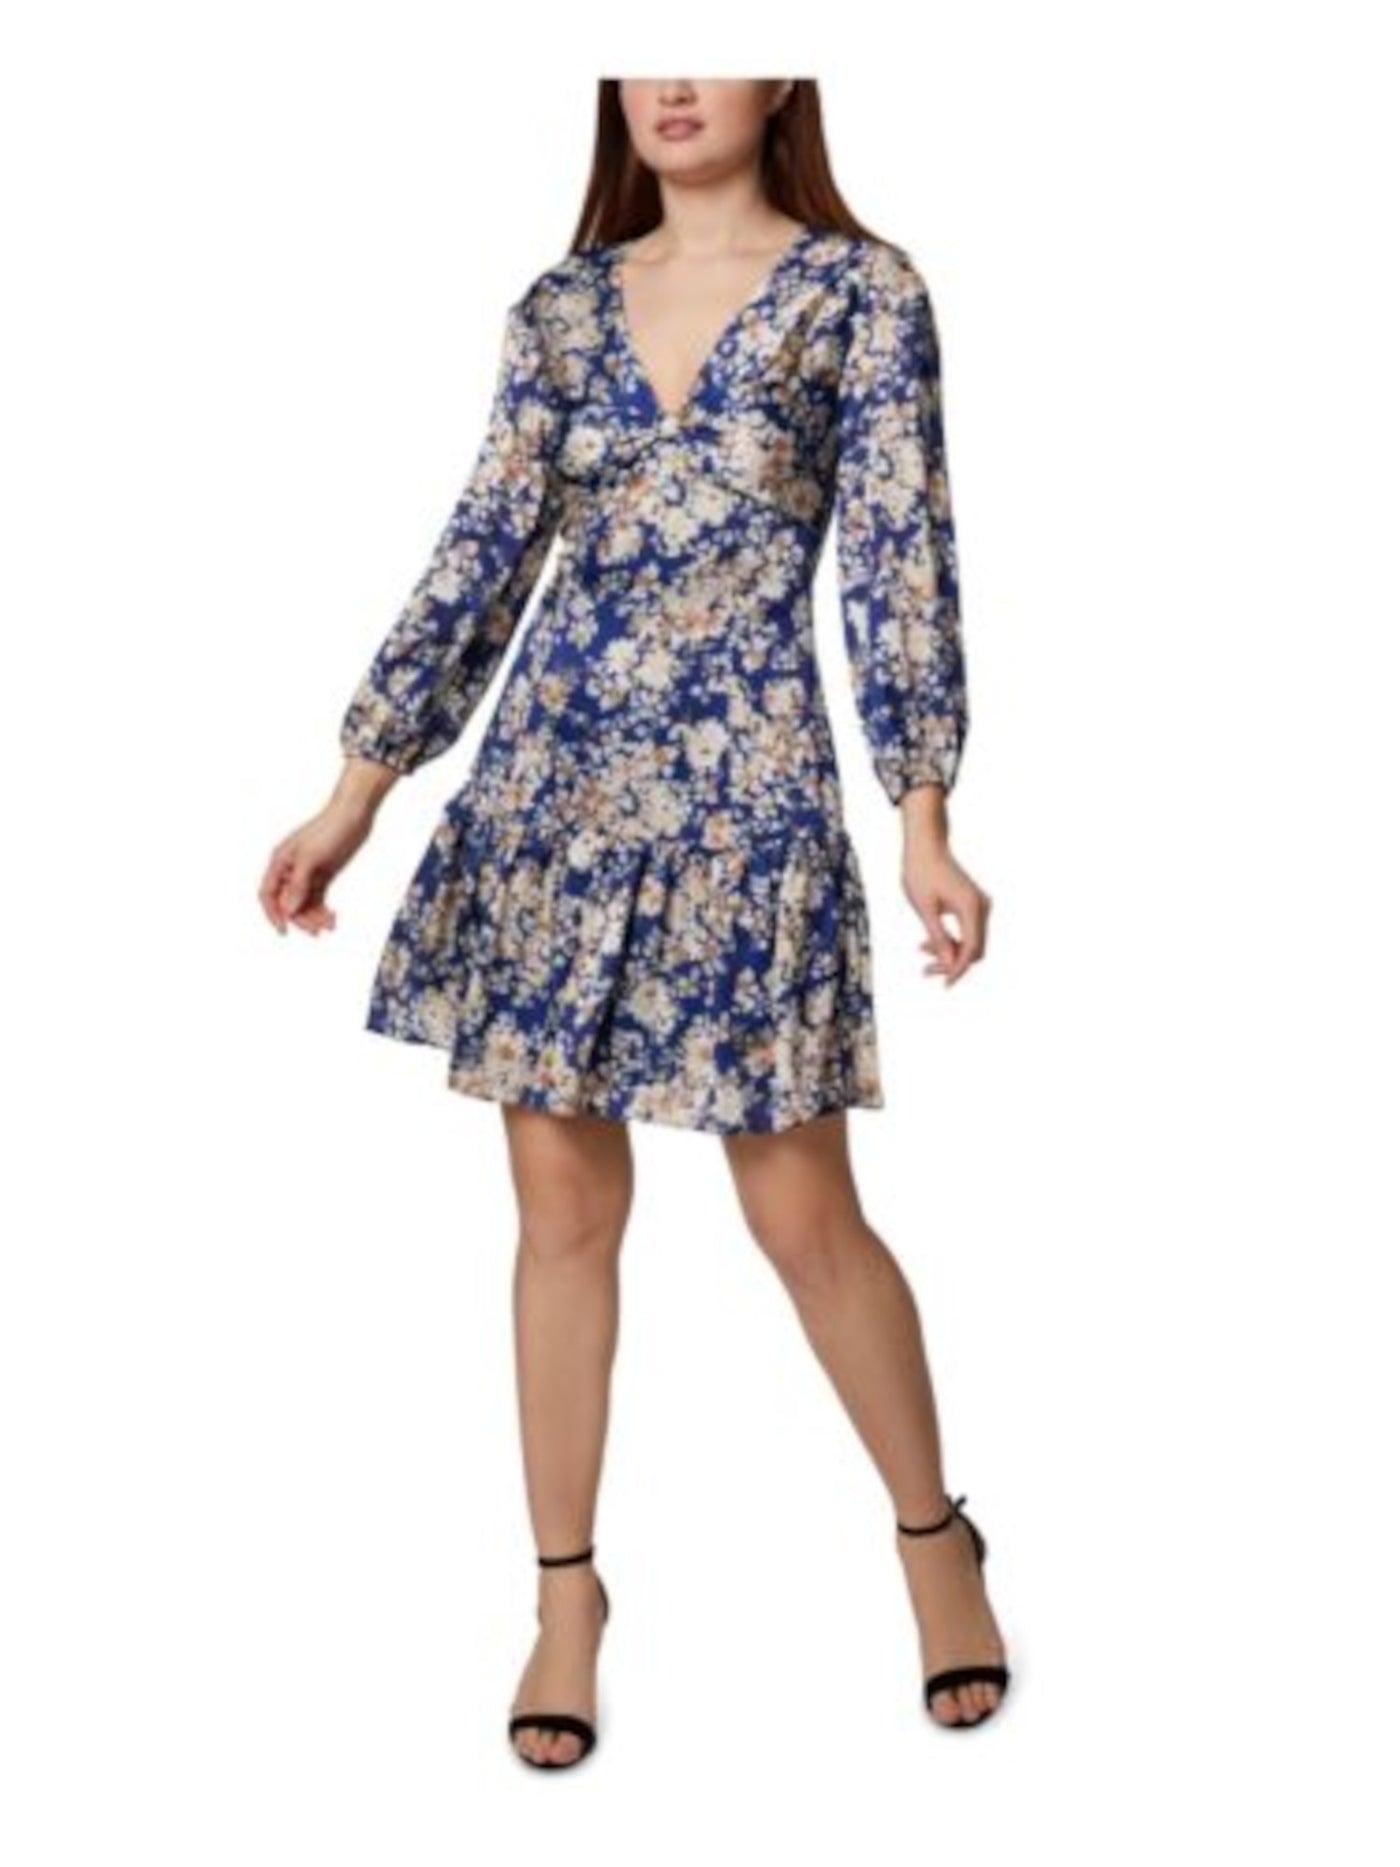 SAGE COLLECTIVE Womens Blue Zippered Ruffled Bow Detail Lined Elastic Cuffs Floral 3/4 Sleeve V Neck Above The Knee Wear To Work Fit + Flare Dress 2P